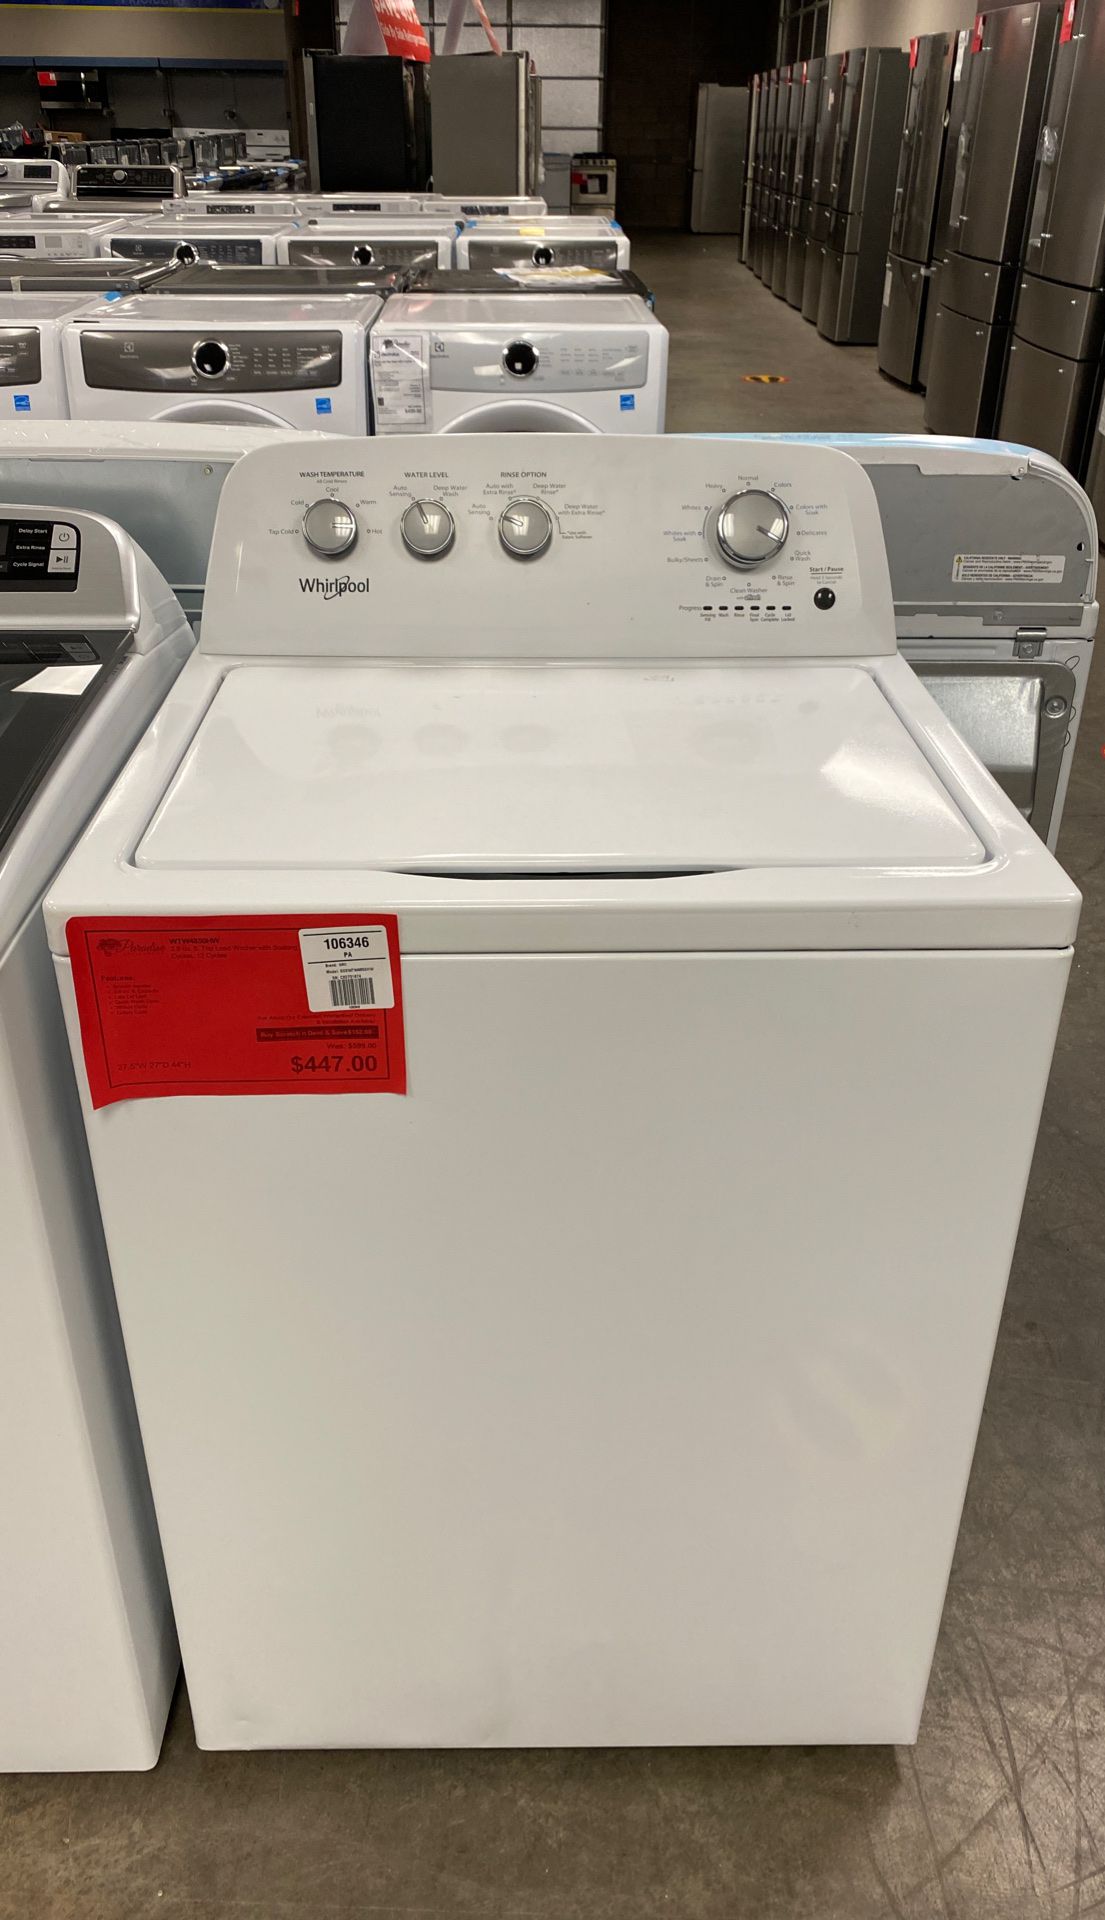 ‼️ON SALE‼️ Whirlpool 3.9 CuFt Top Loading Washer